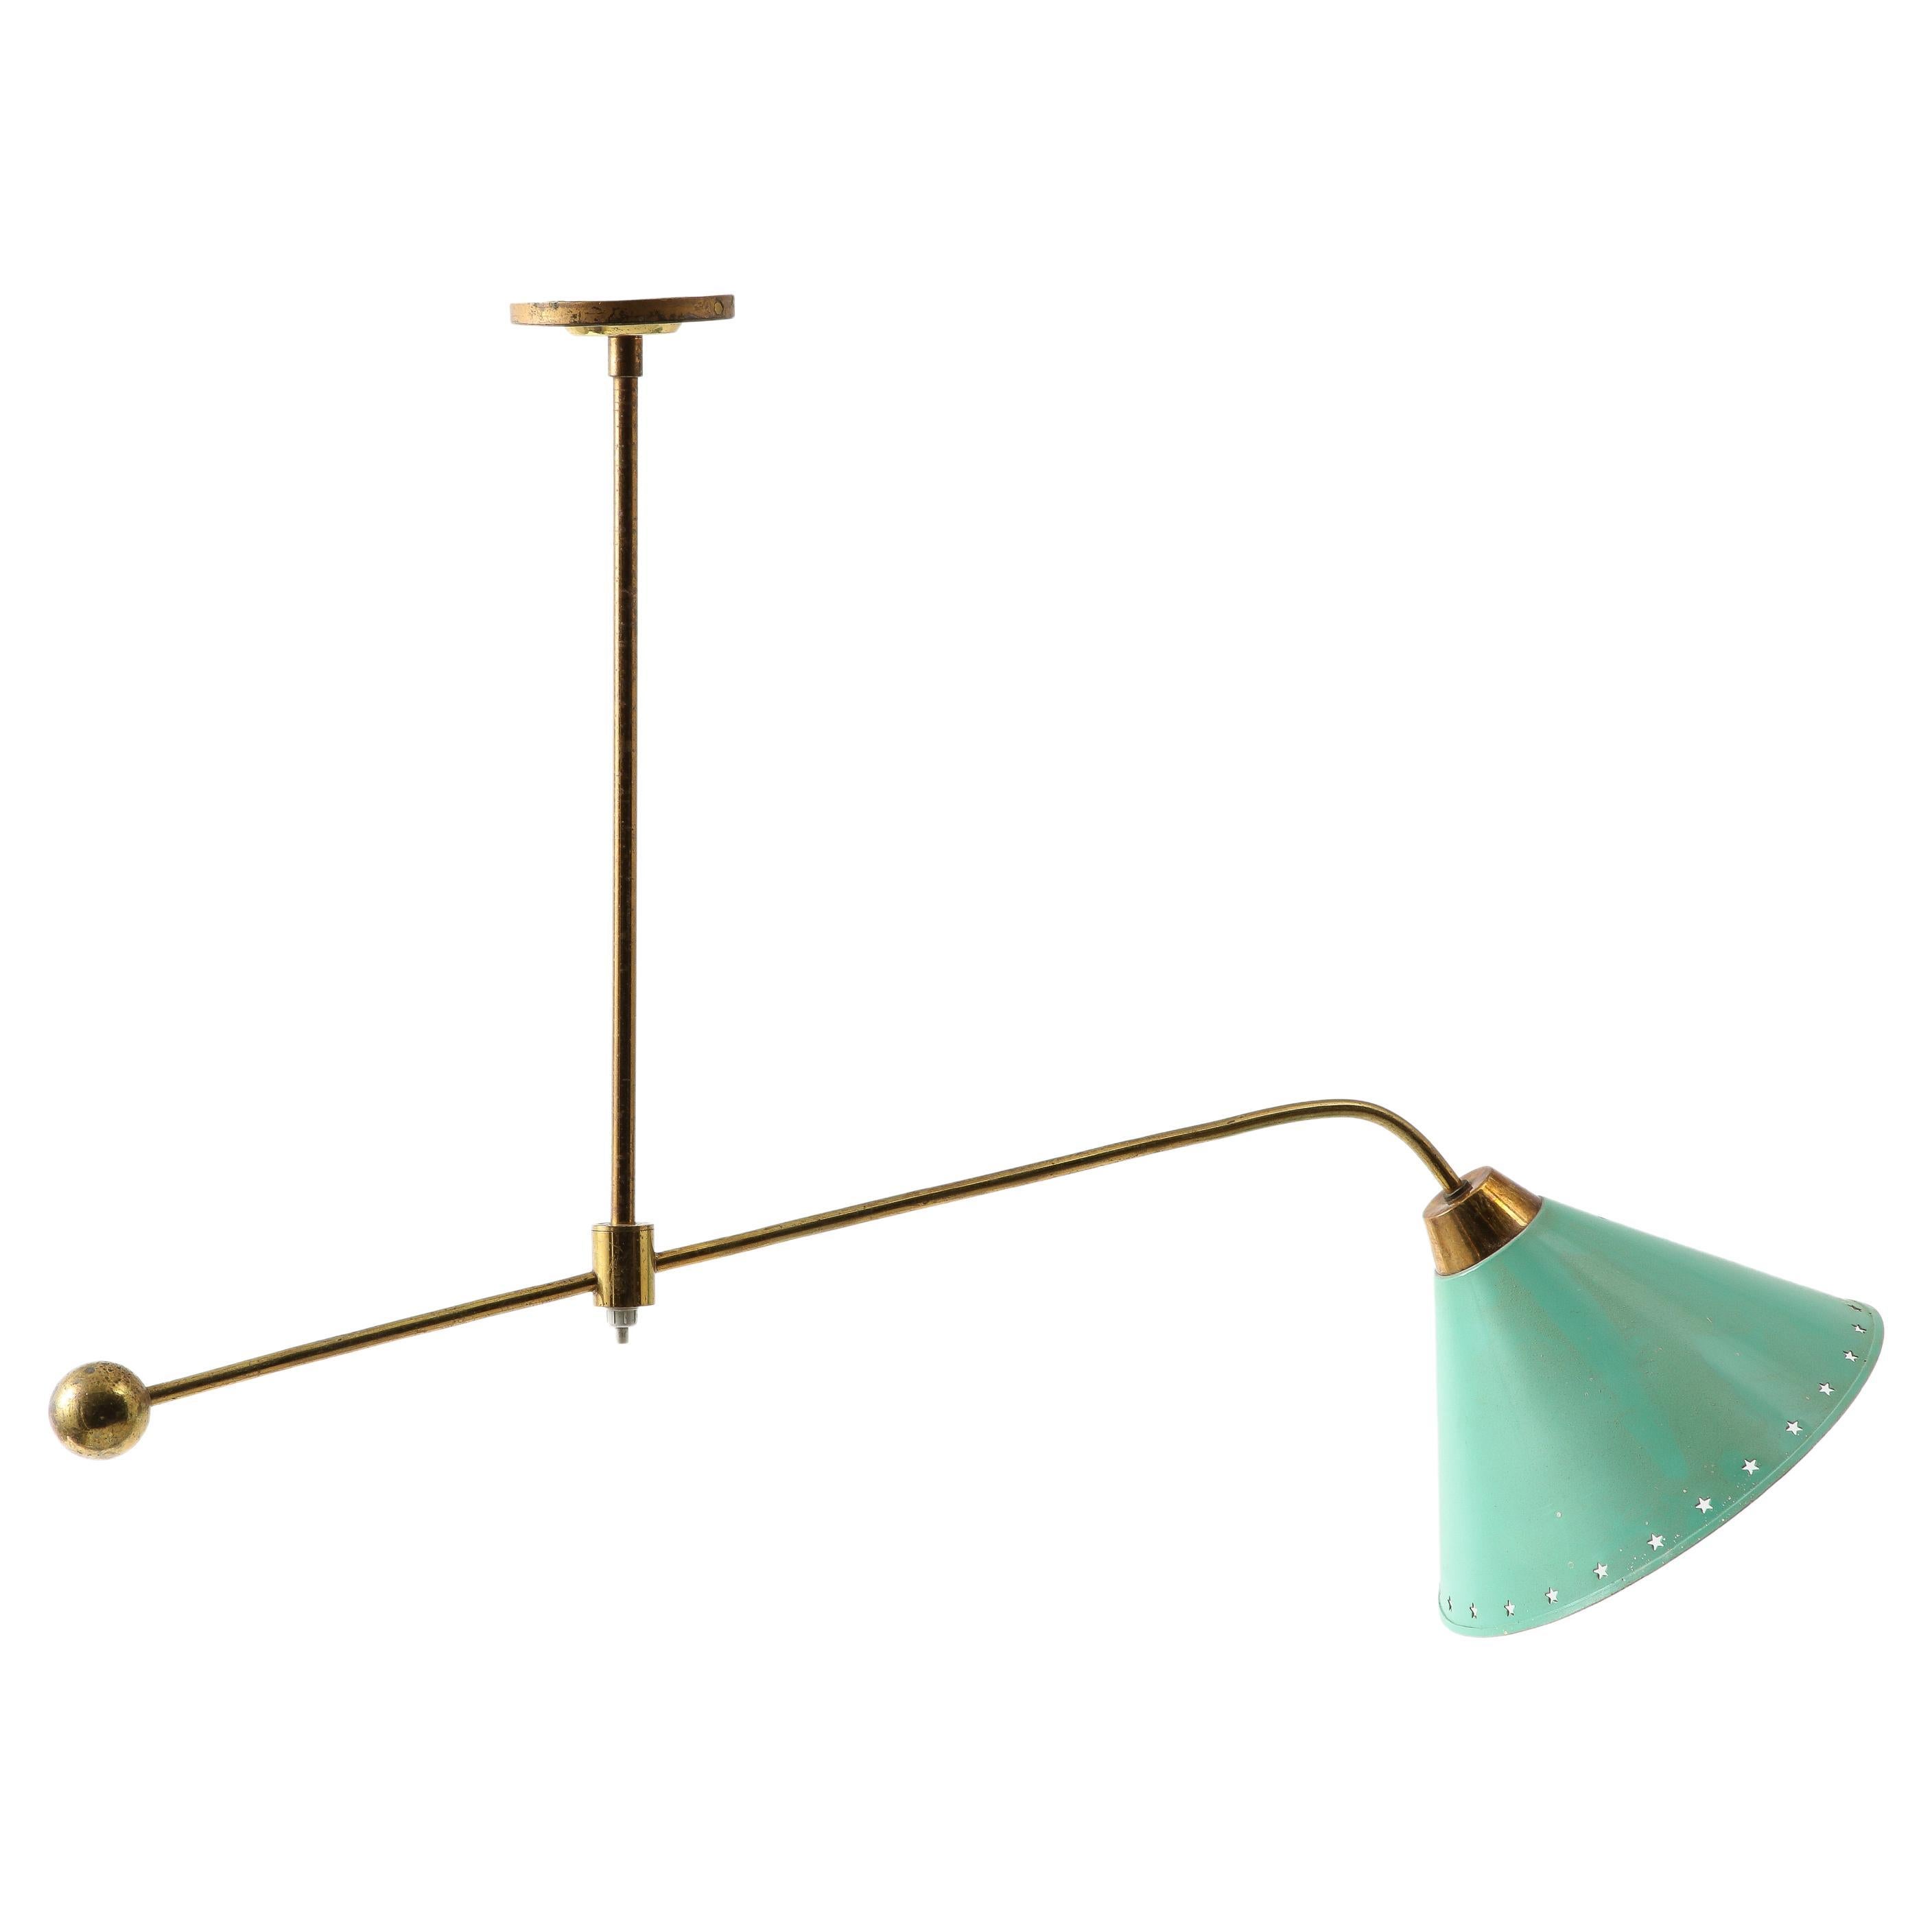 Arlus Brass Asymmetrical Ceiling Fixture with Green Shade, France 1960's For Sale